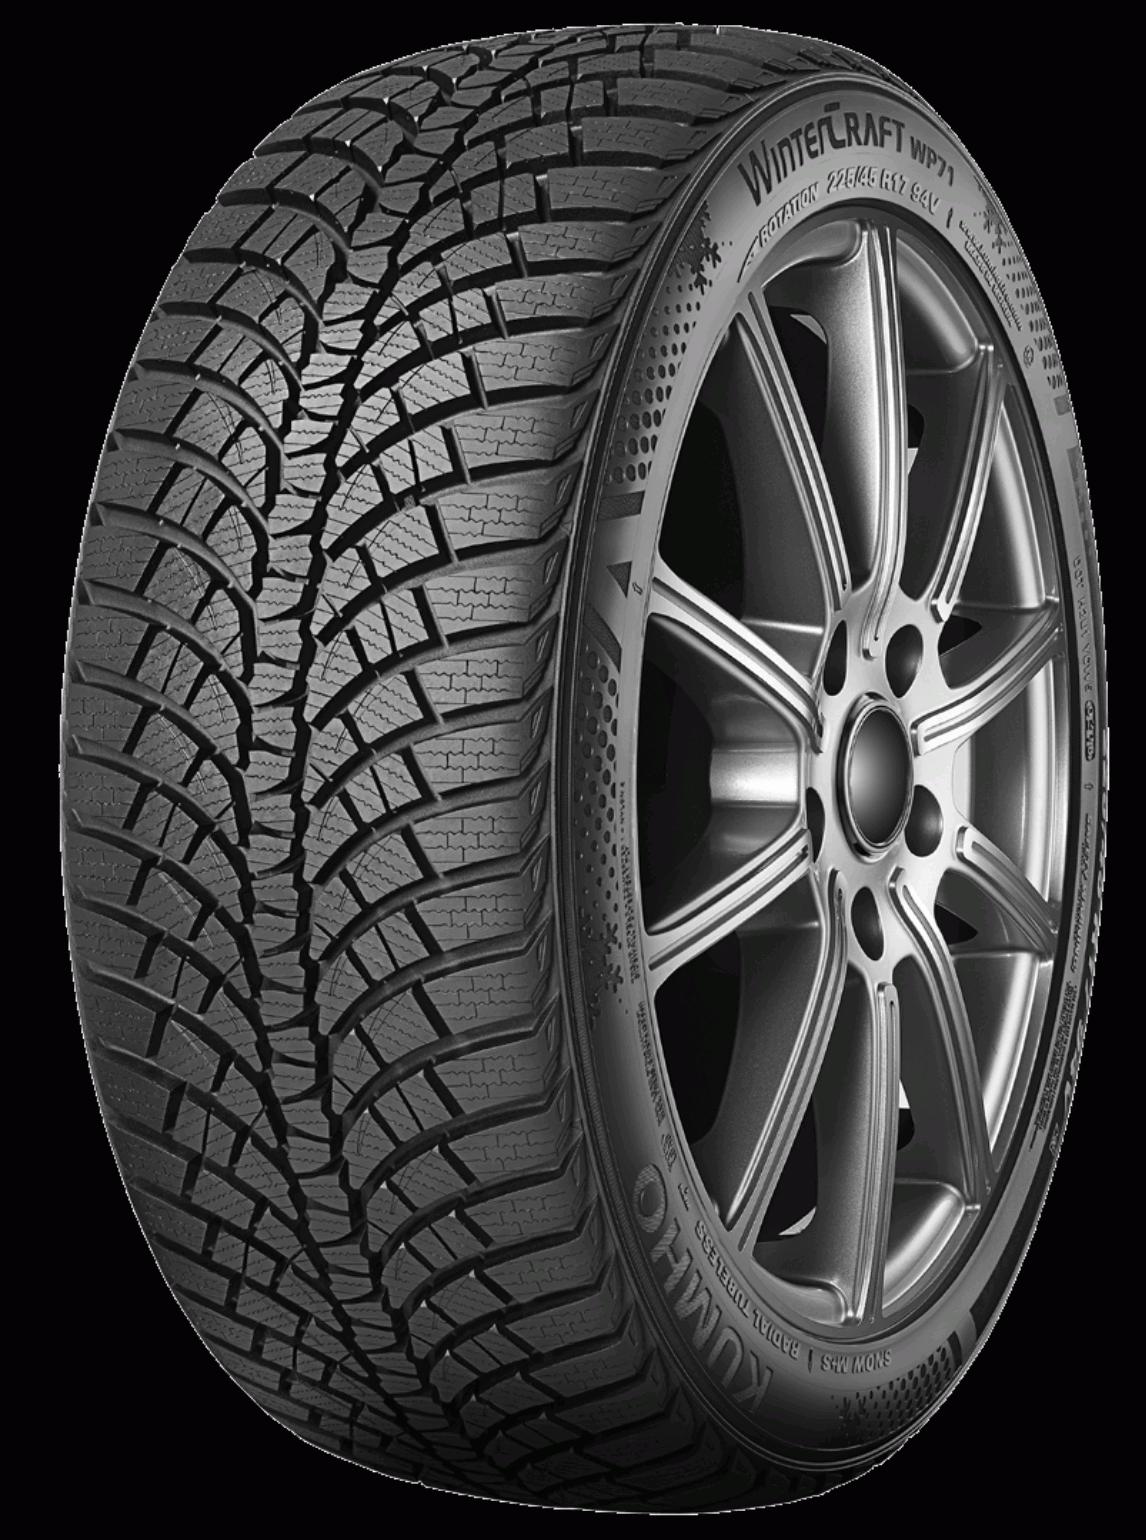 - Tyre and WinterCraft WP71 Kumho Tests Reviews